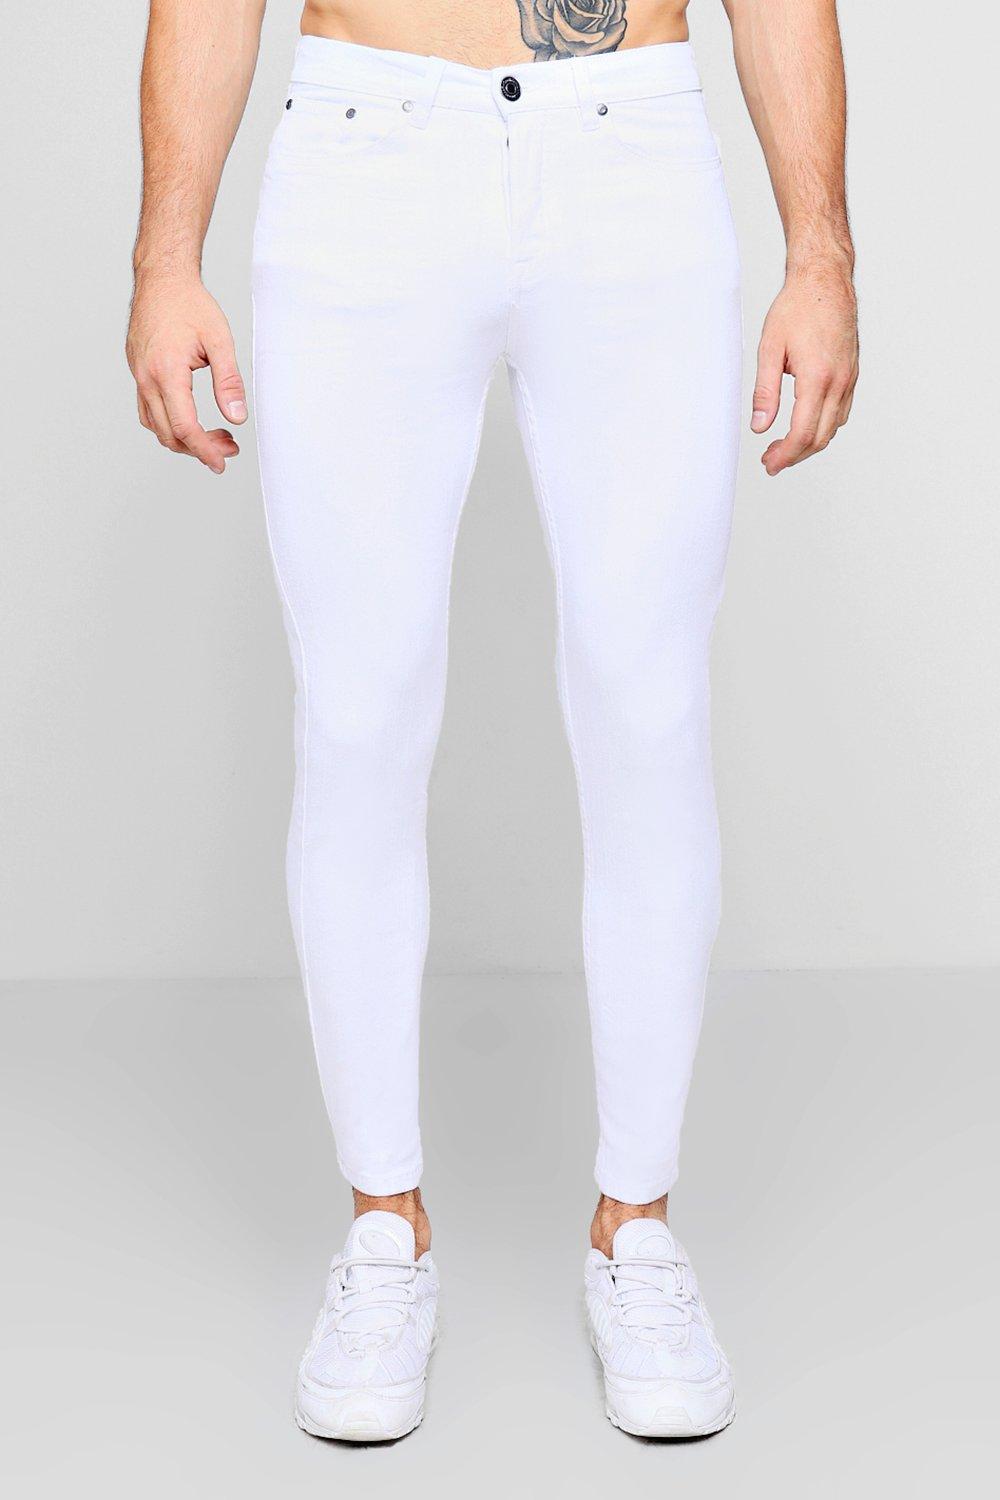 white jeans fit